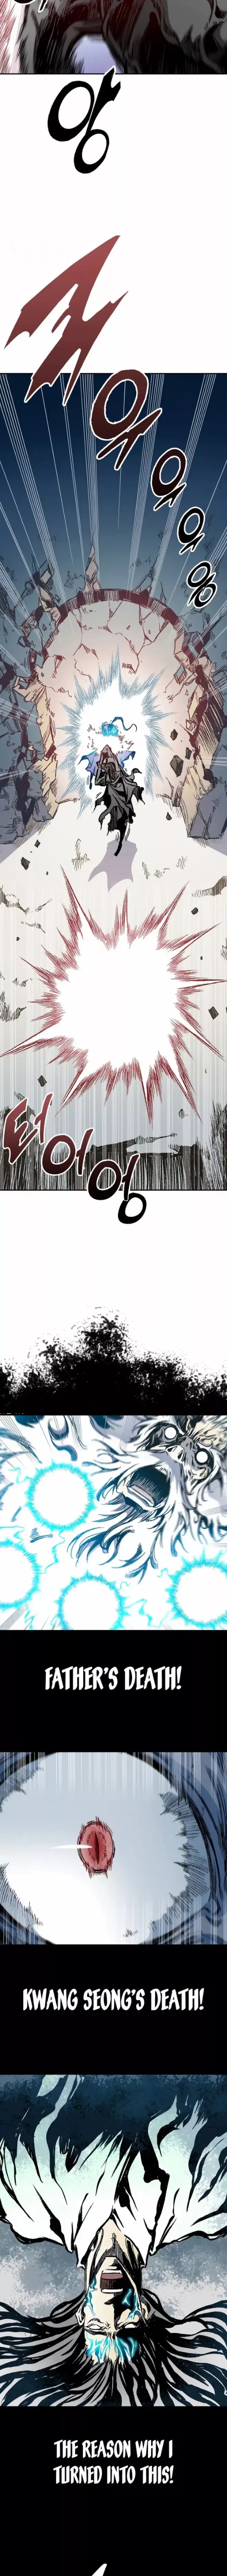 Memoir Of The God Of War - Chapter 131 Page 9